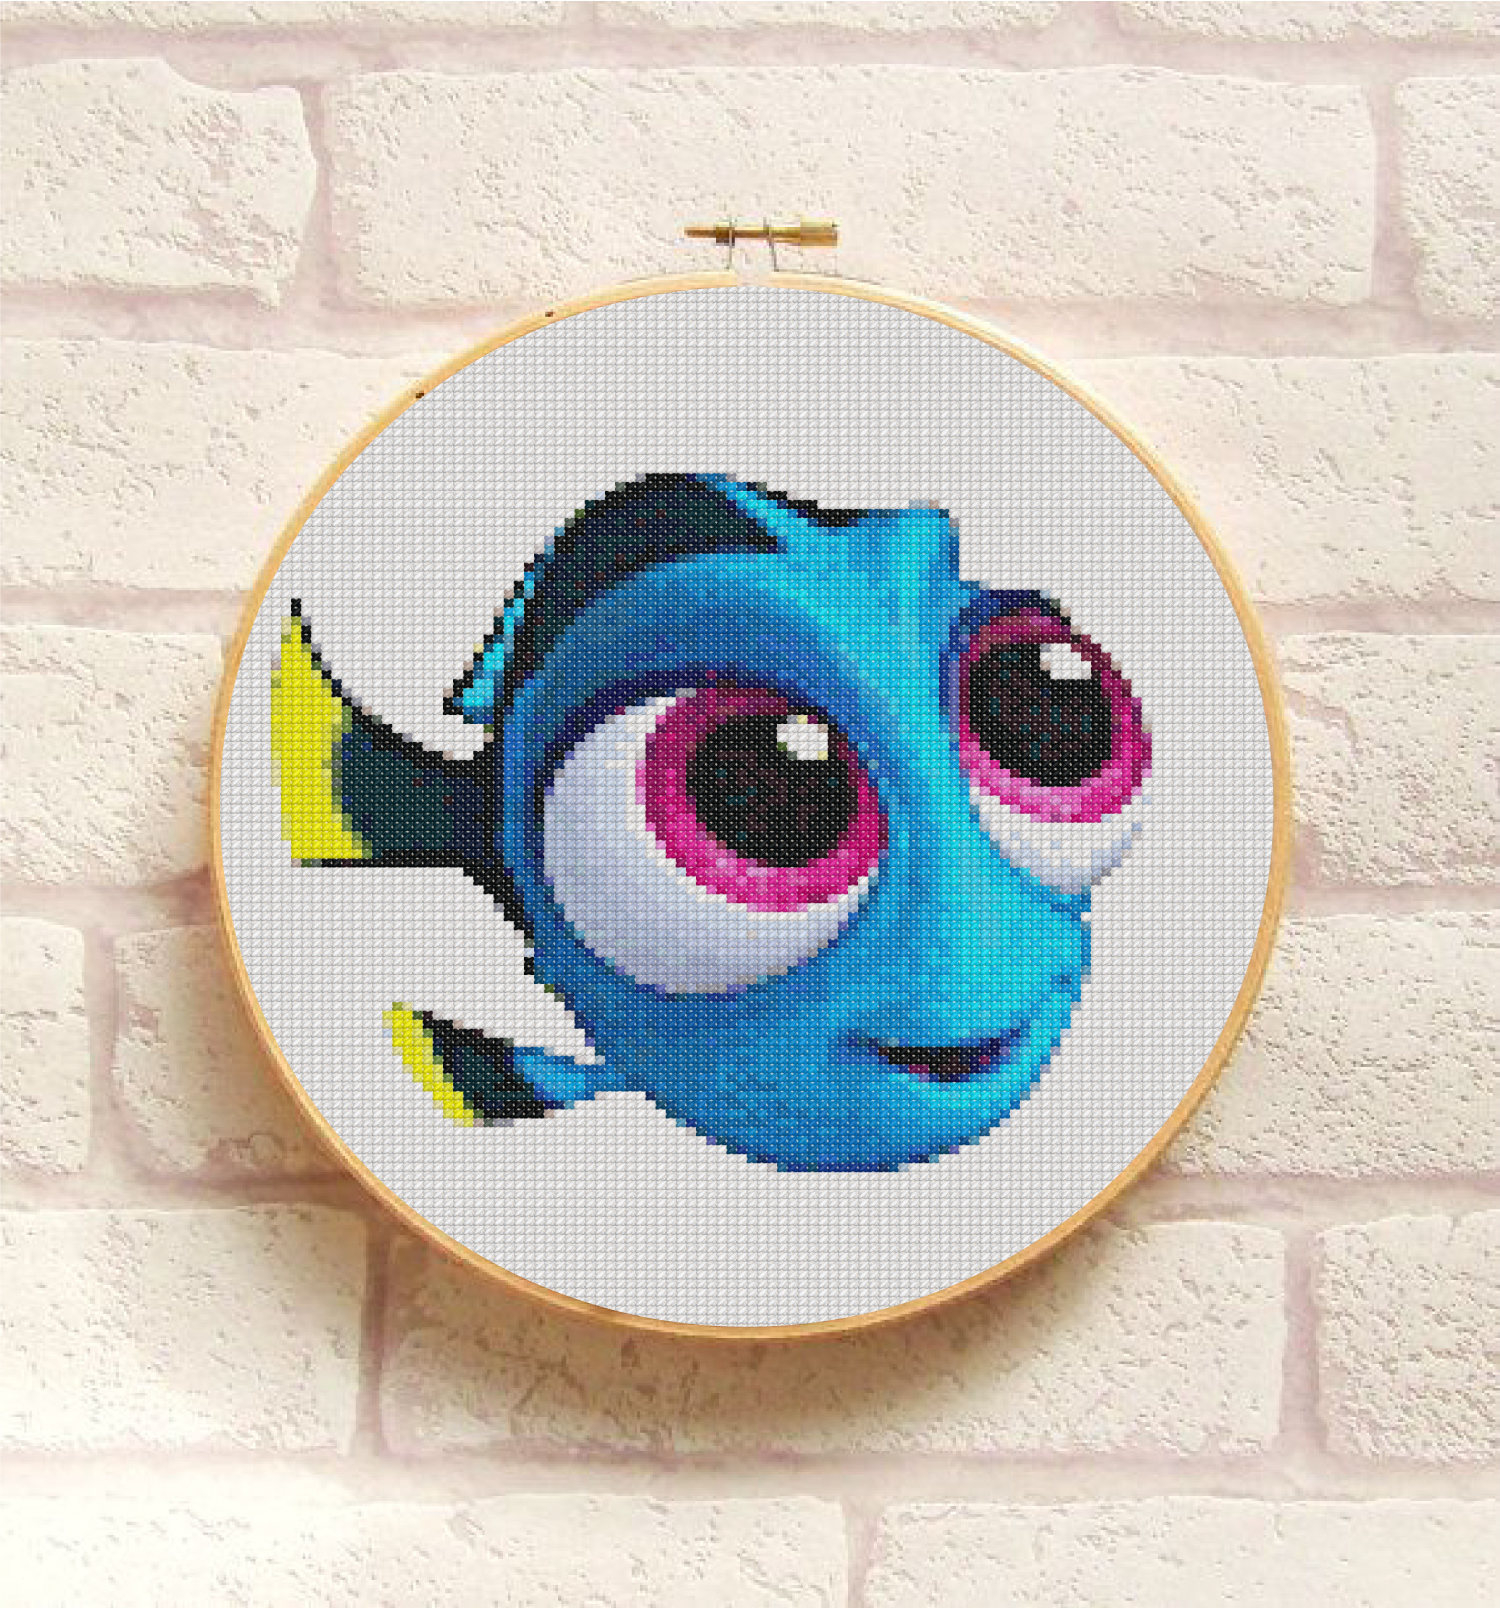 Disney Embroidery Patterns Ba Dory Cross Stitch Pattern Pdf Disney Embroidery Cute Nursery Decor Fish Finding Dory Counted Cross Stitch Chart Instant Download